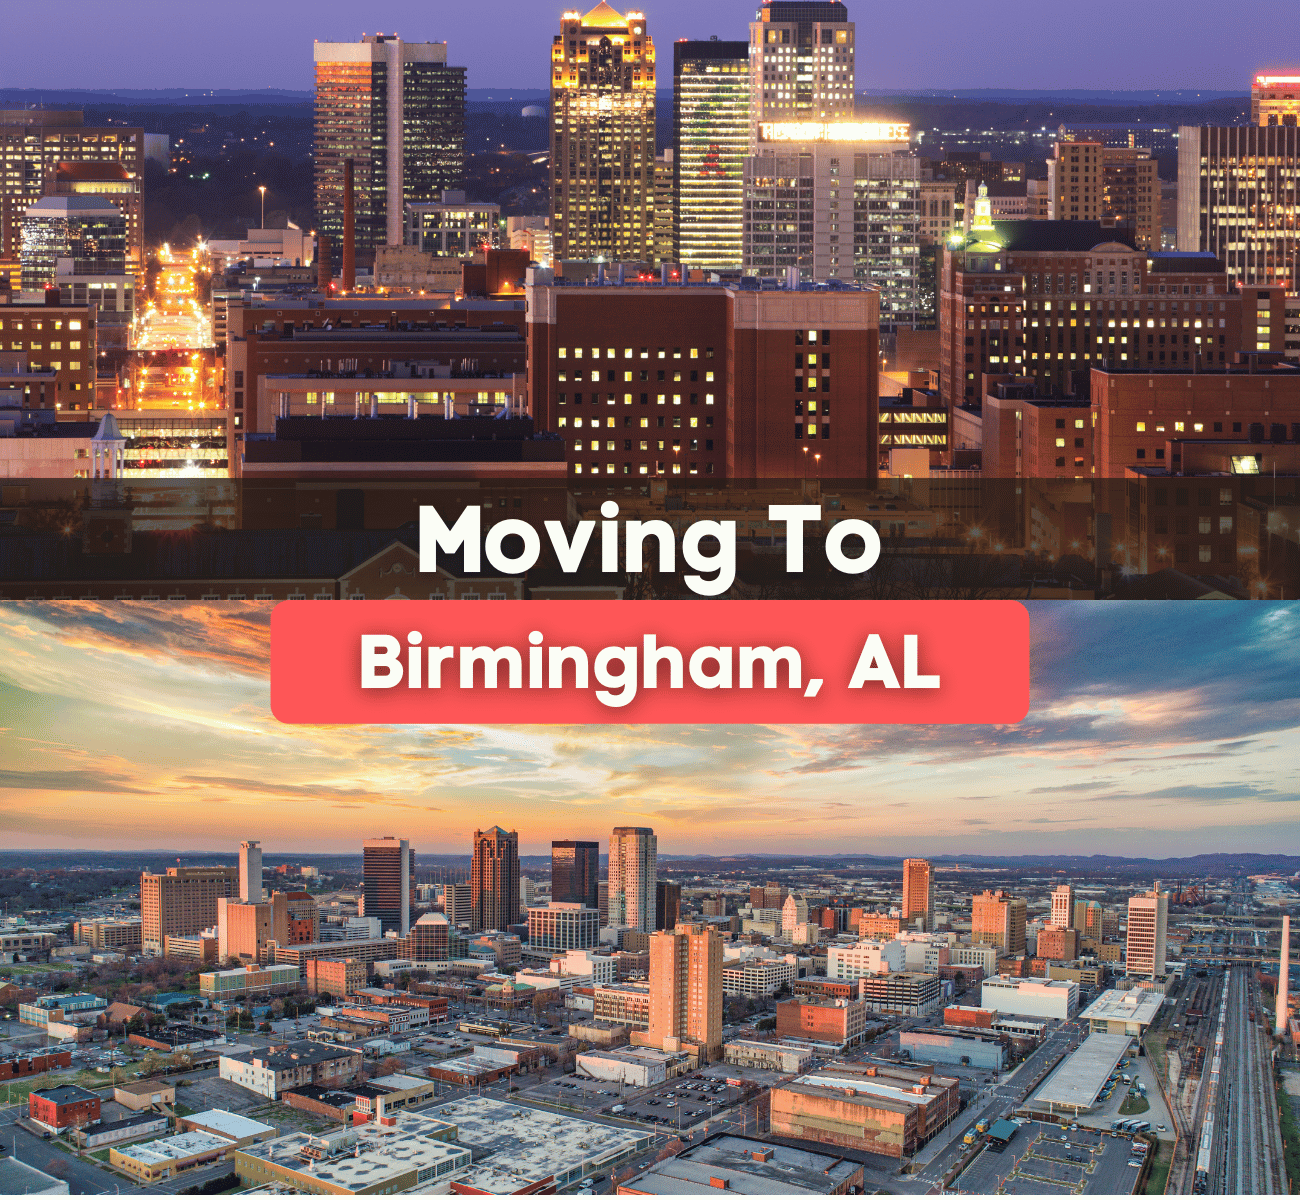 Moving to Birmingham, AL skyline at night with buildings and bright lights 